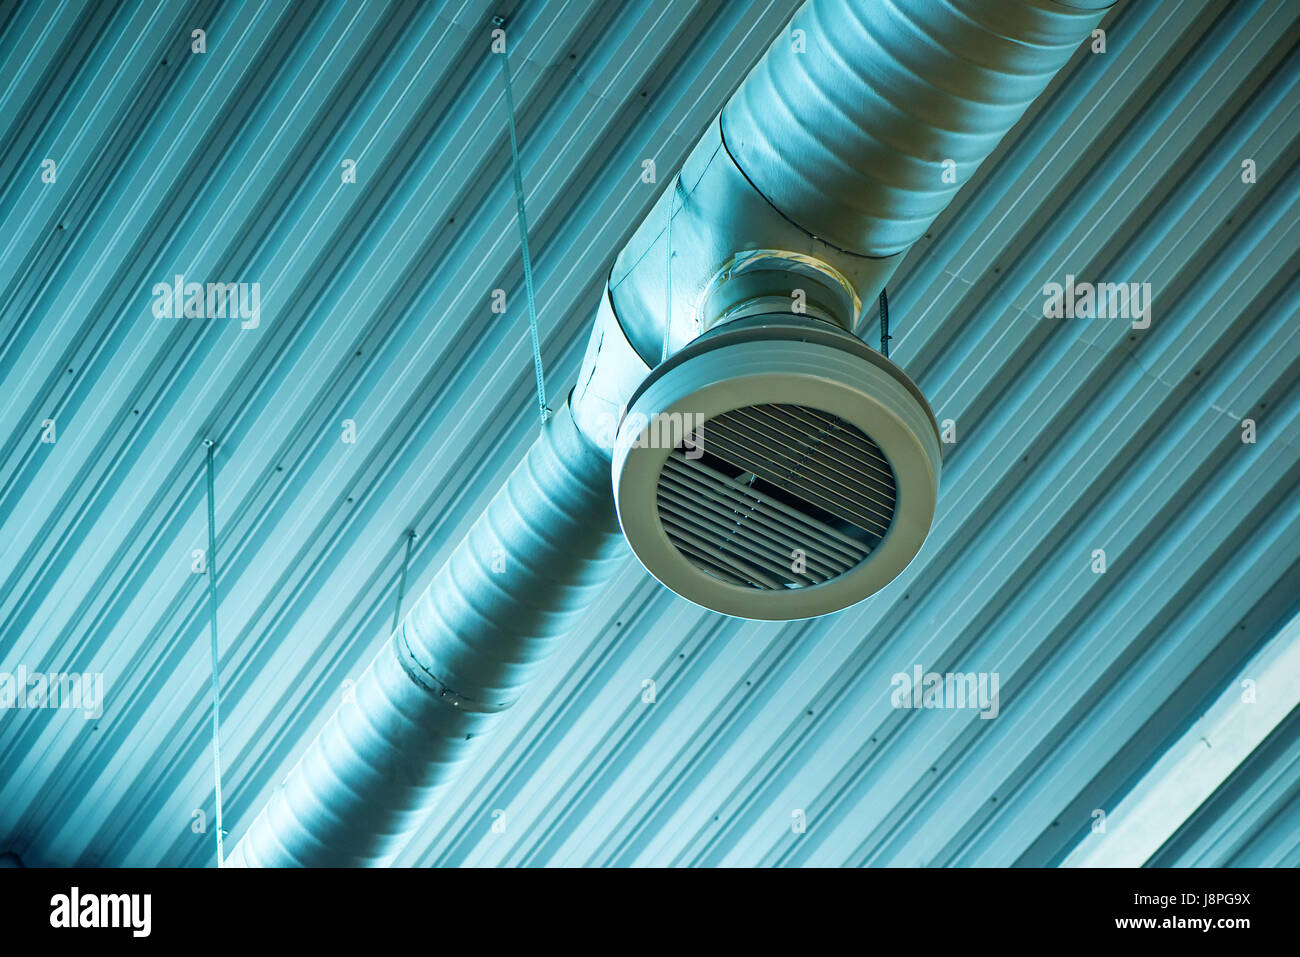 Industrial ventilation system pipes on warehouse ceiling Stock Photo